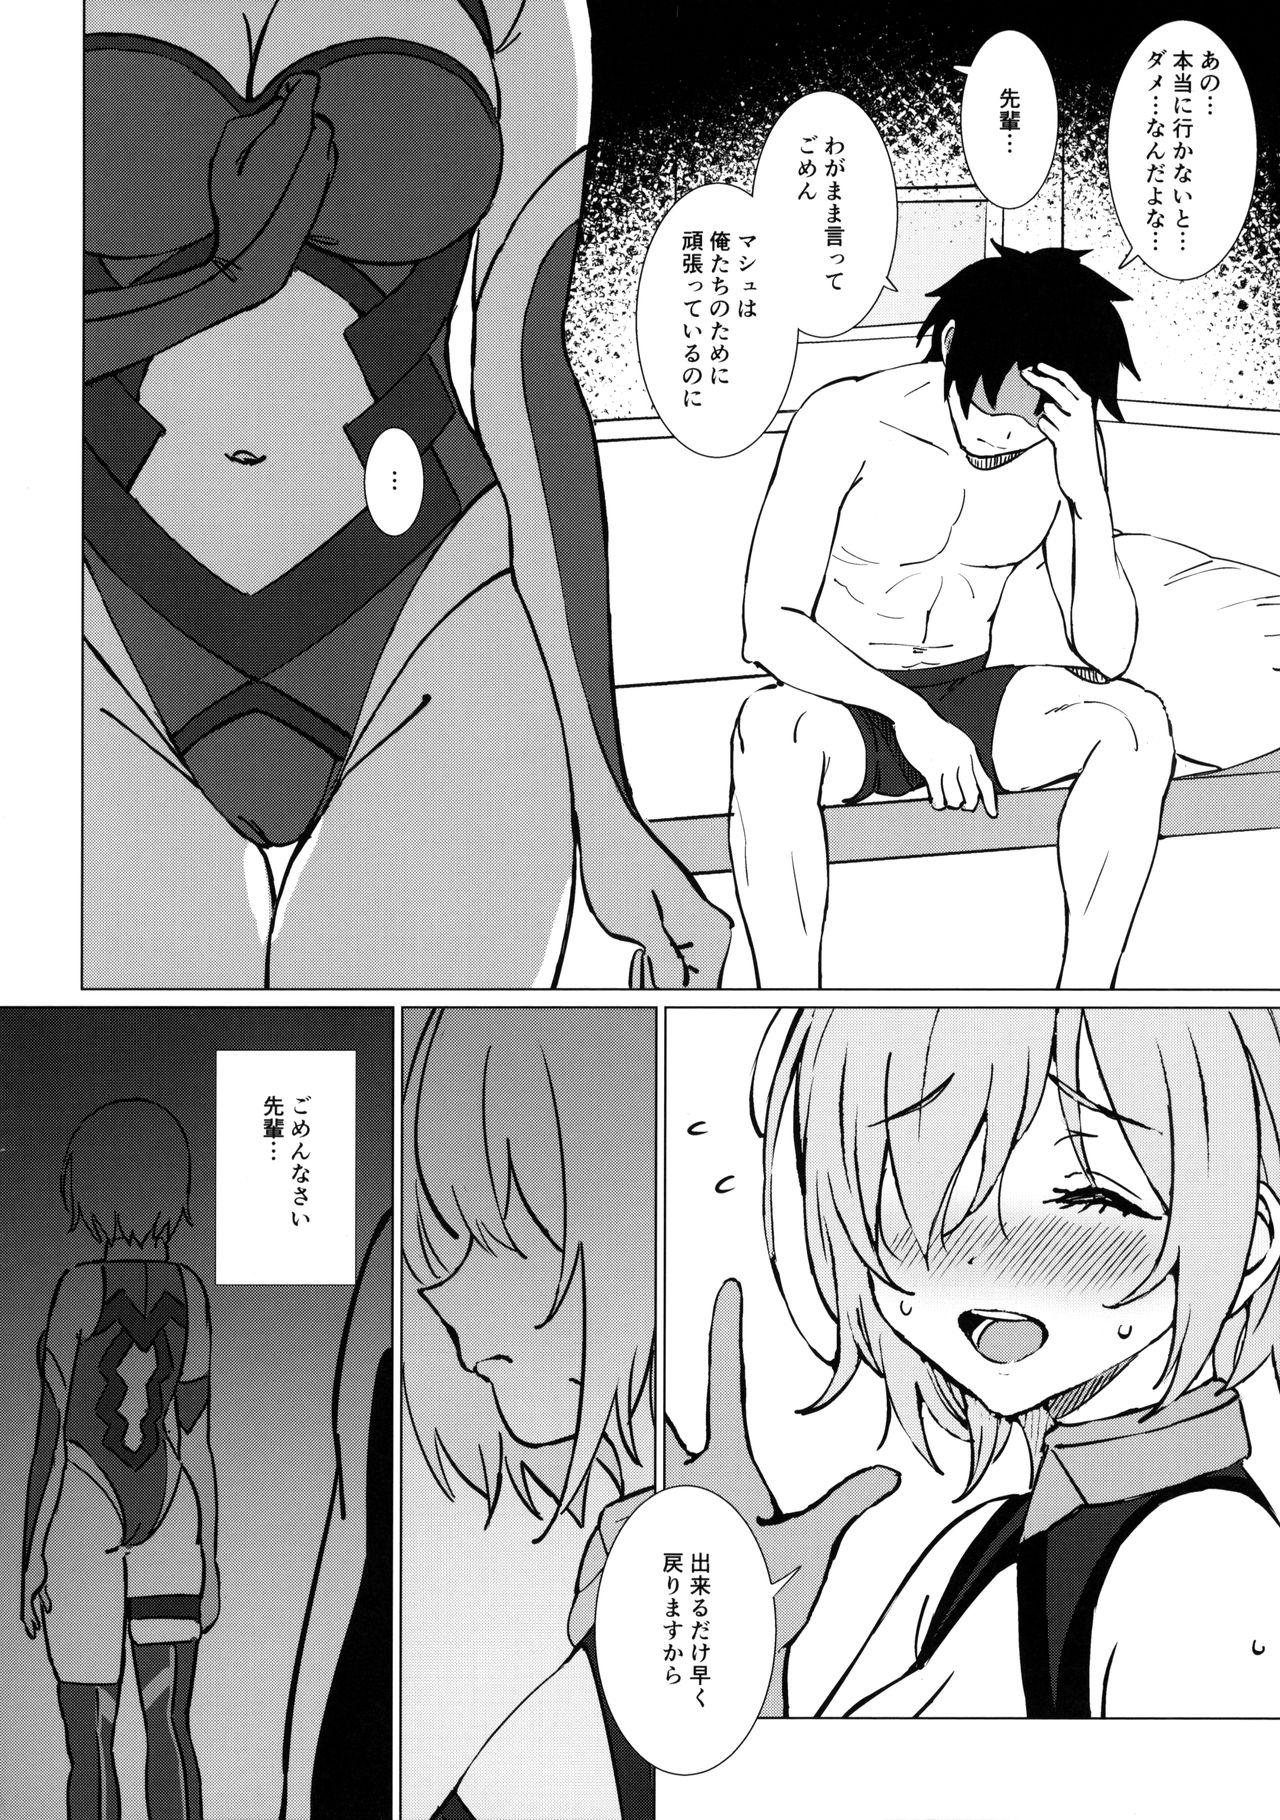 Chicks Anten - Fate grand order Gay Orgy - Page 5